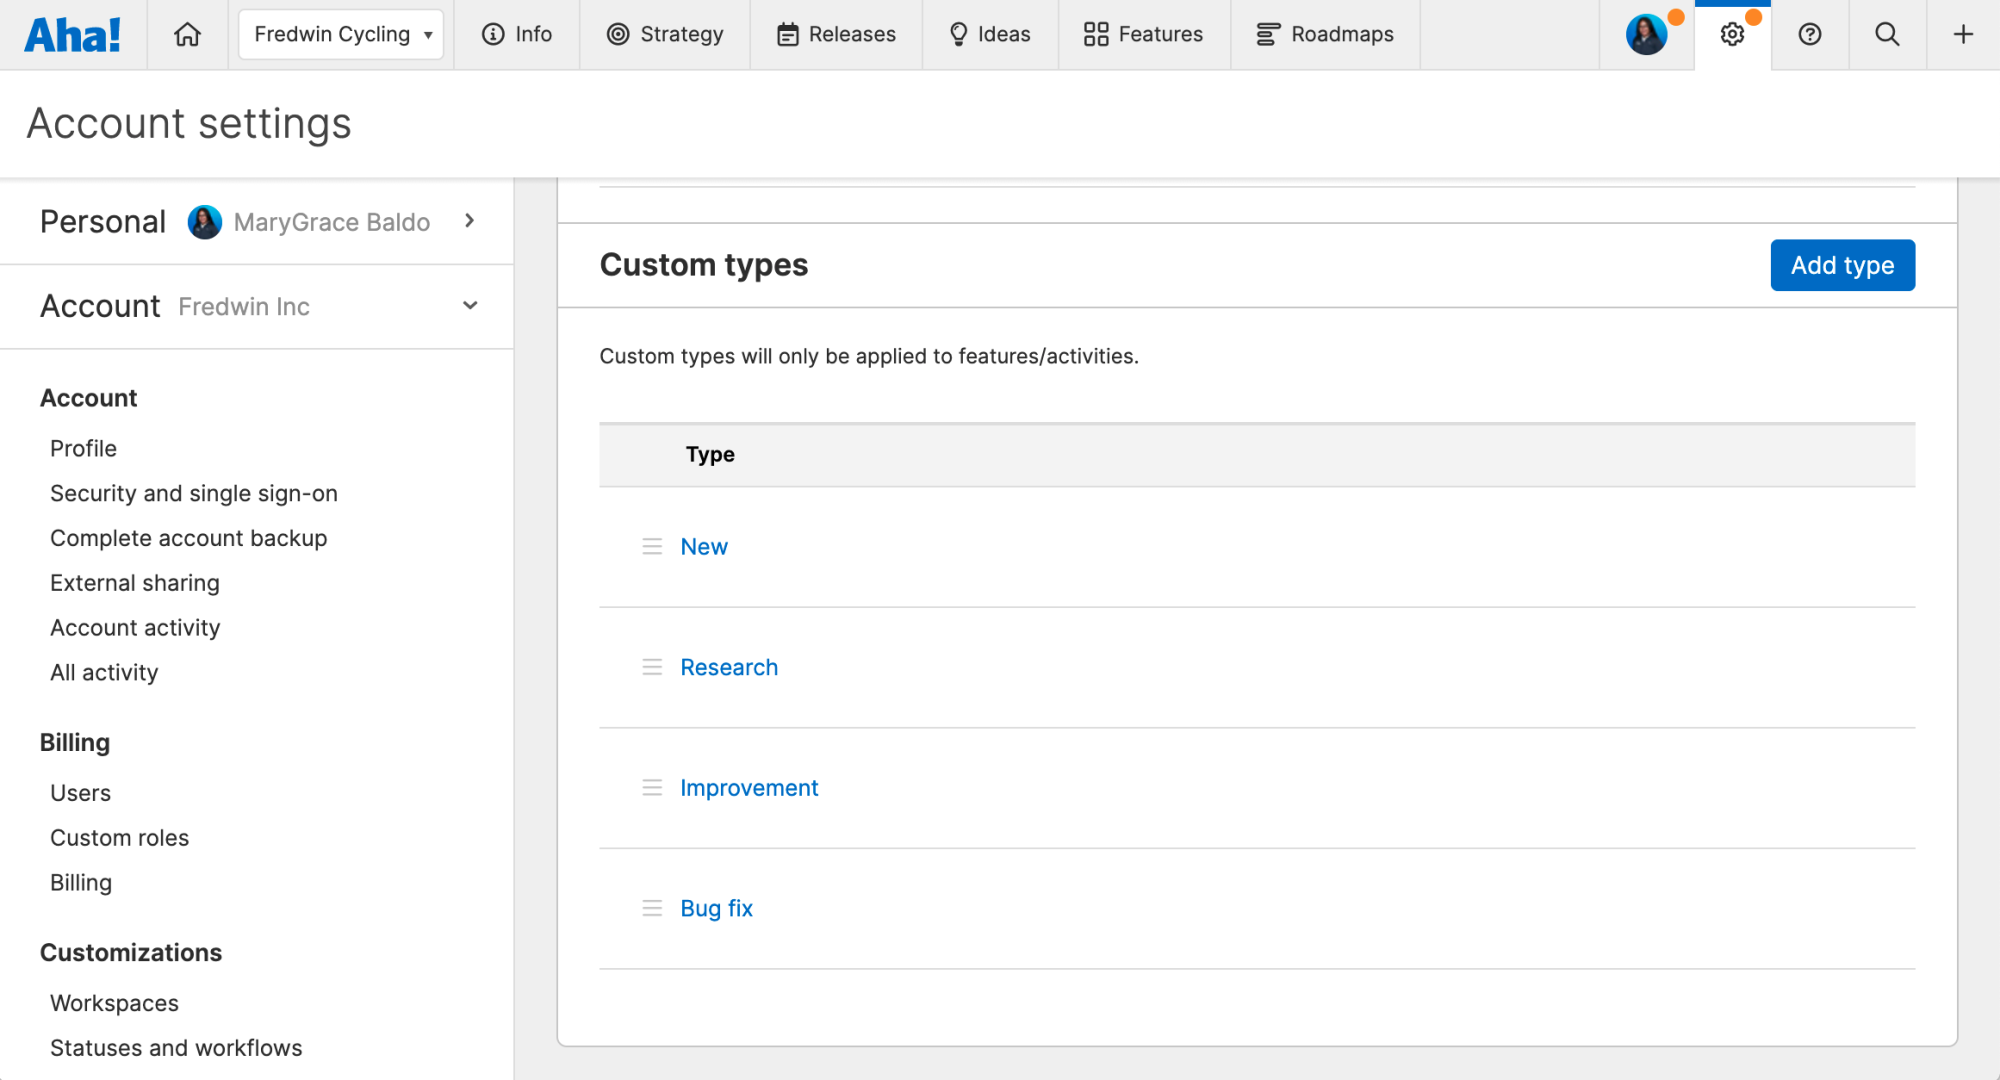 Custom types for statuses and workflows